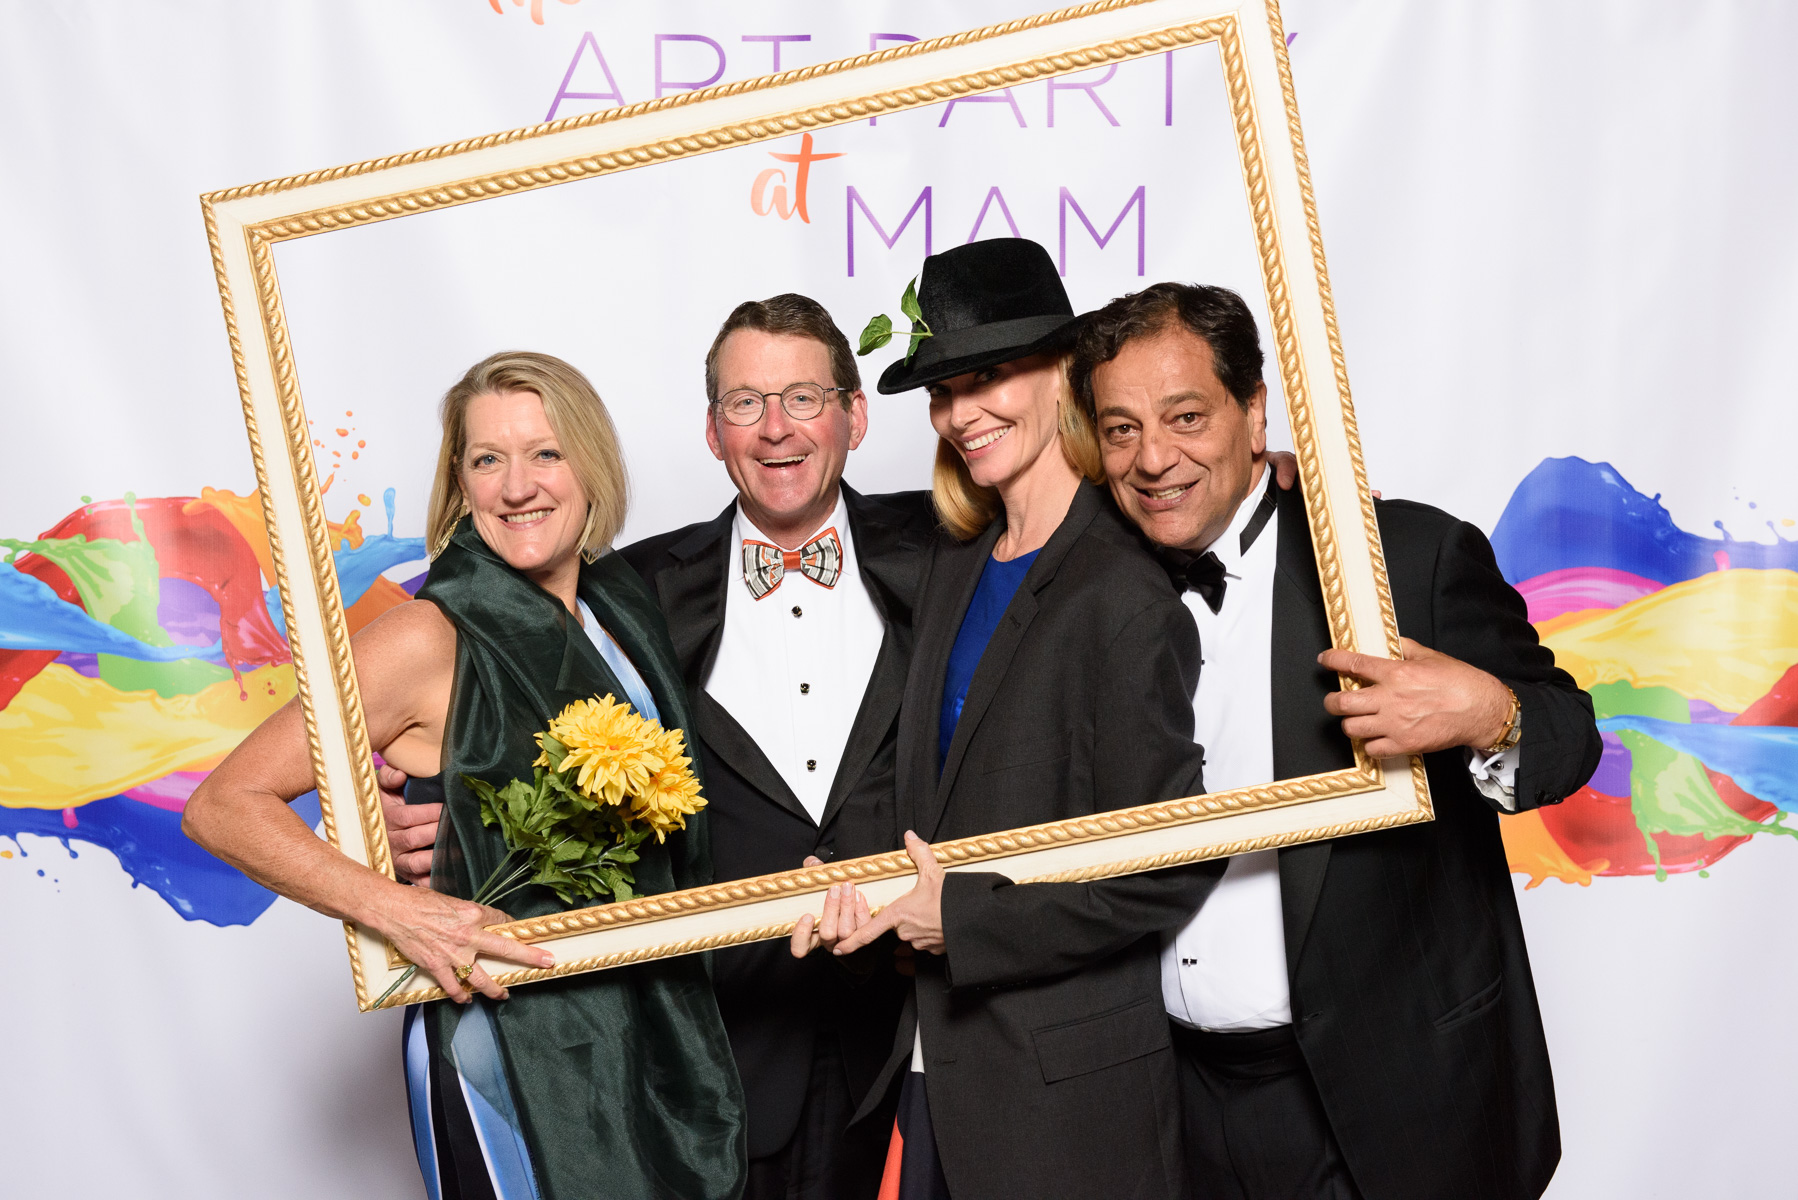 Four Patrons attending the Art Party pose in front of a banner with an empty picture frame